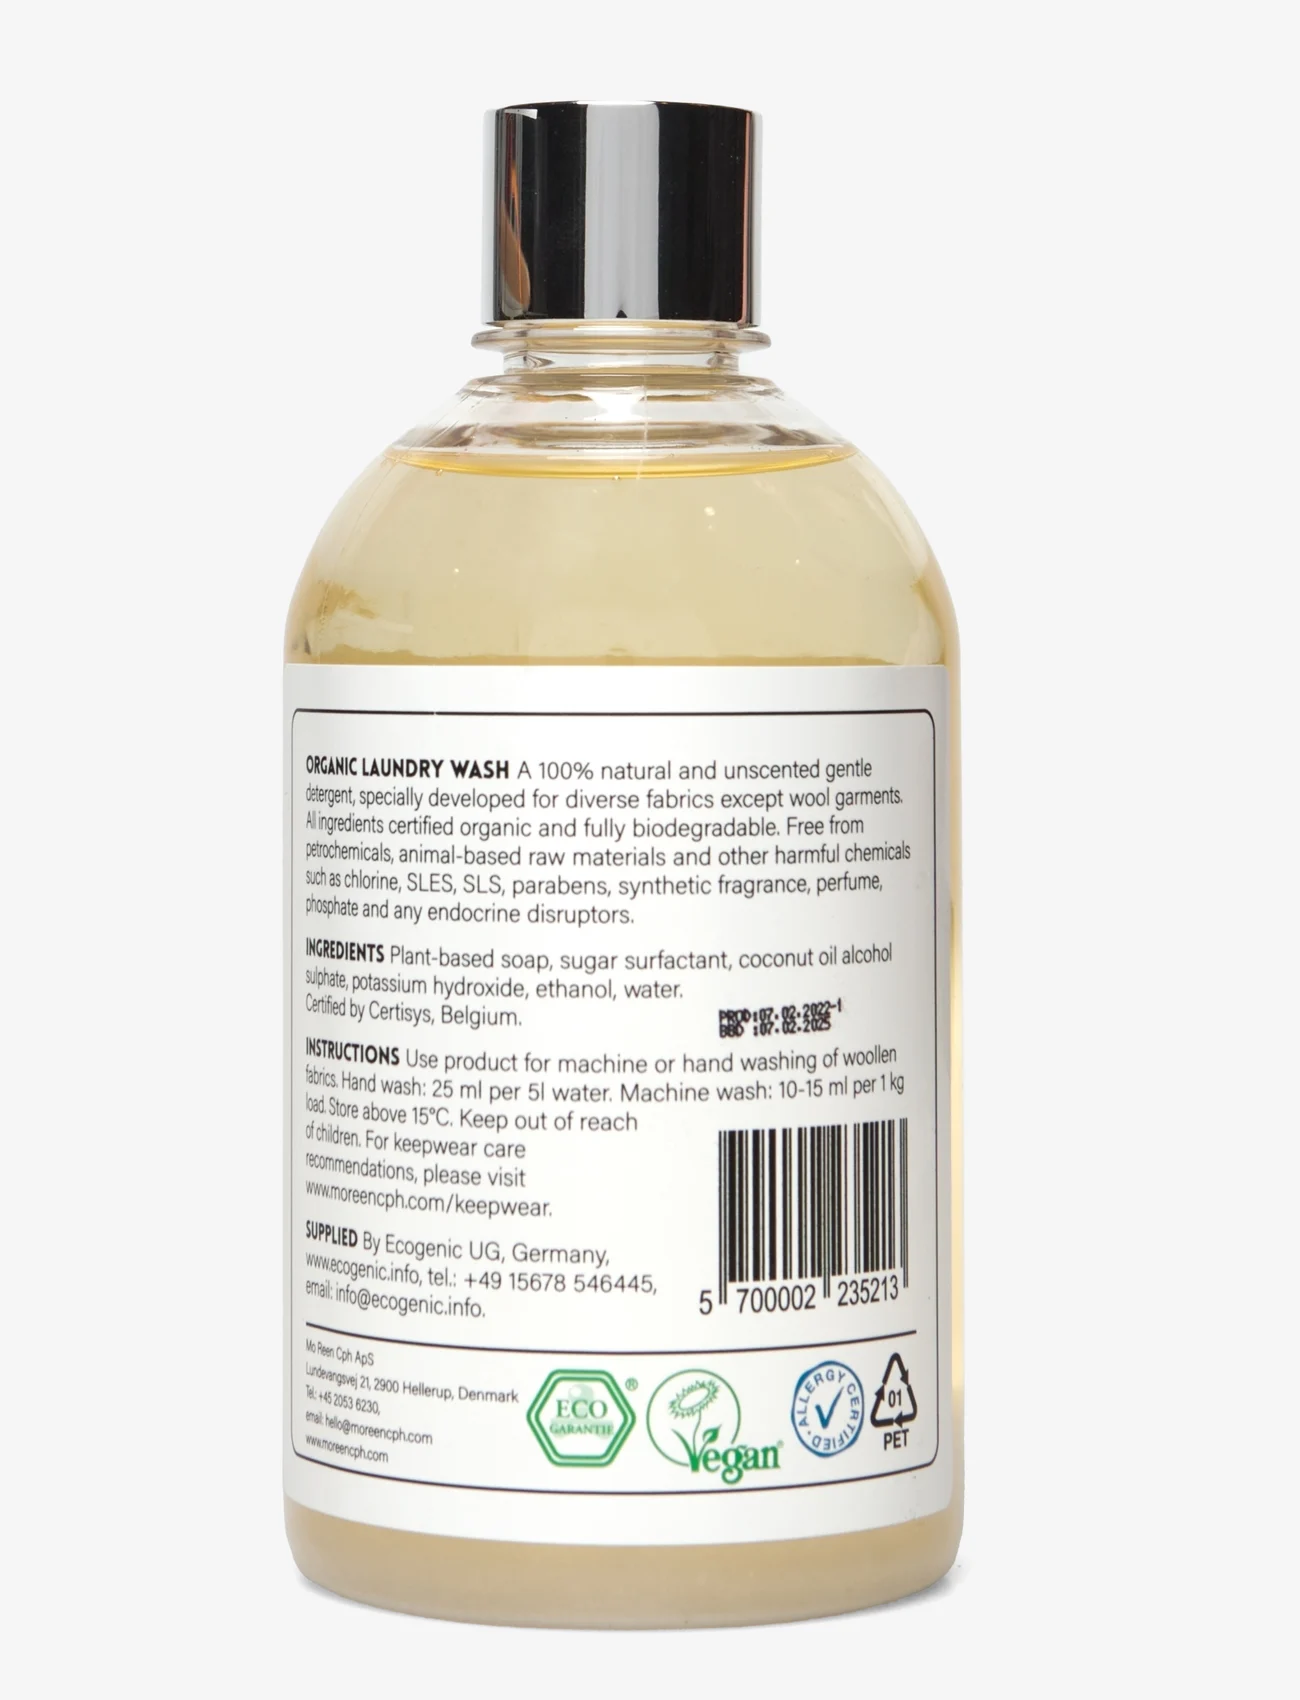 Mo Reen Cph - Organic Laundry Wash - lowest prices - transparent - 1